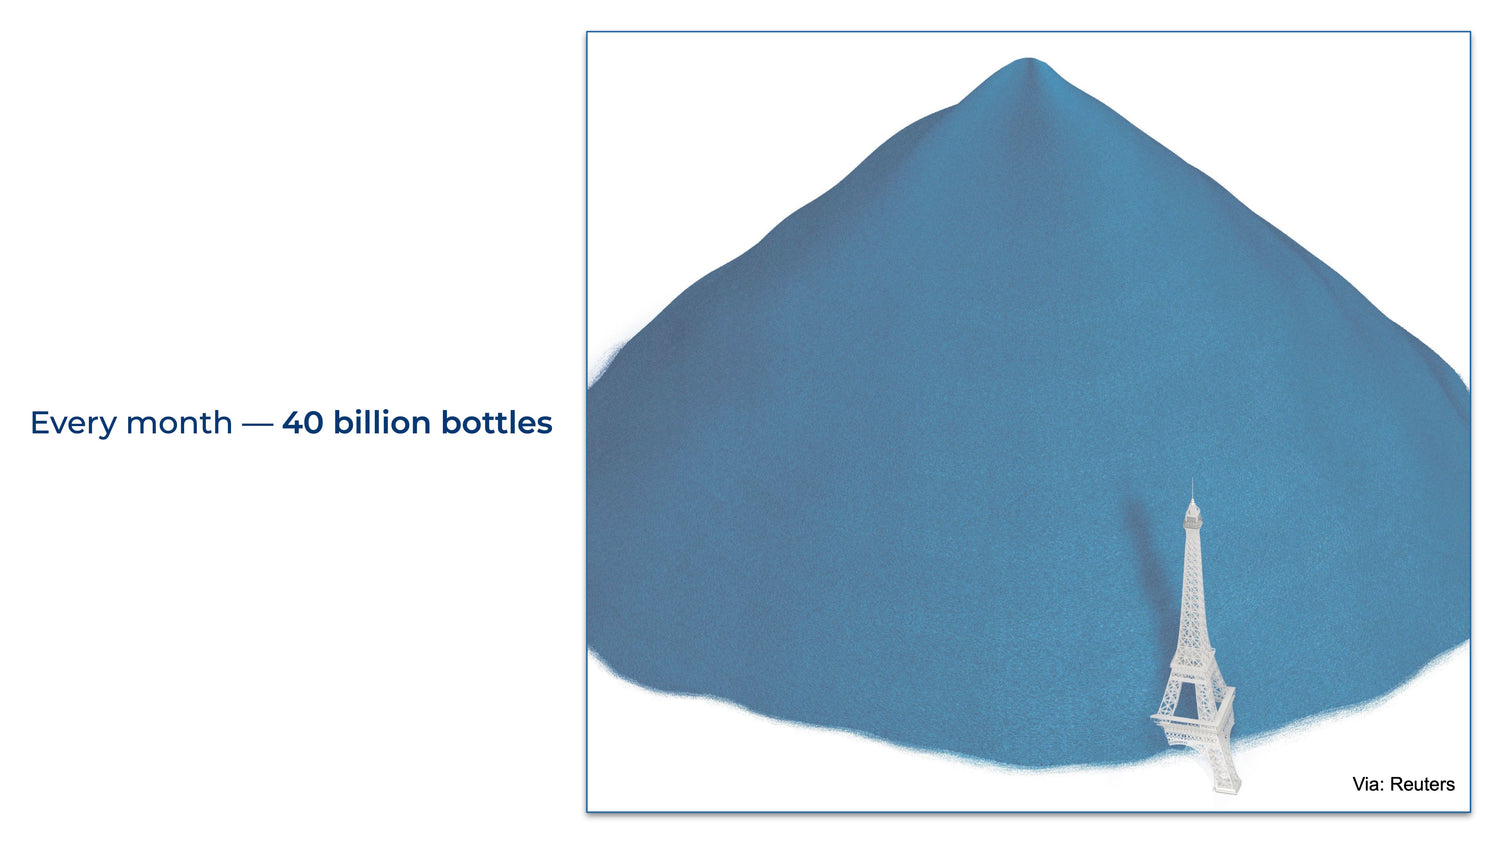 Impact of Plastic Bottles: visualization of monthly single-use plastic bottle consumption towering over the Eiffel Tower.